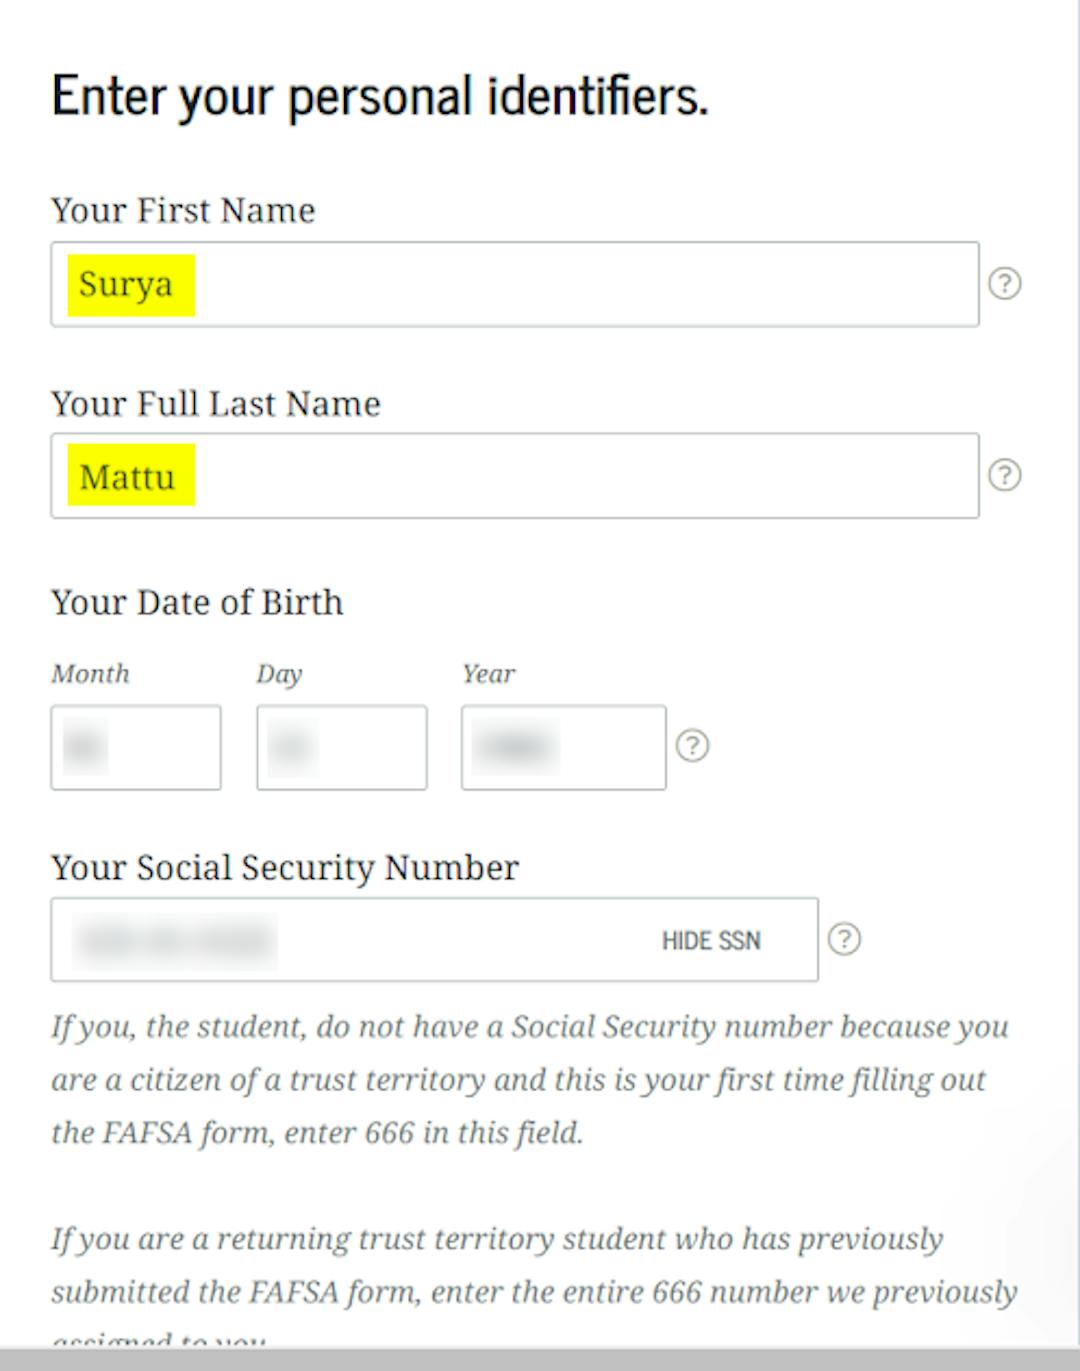 Screenshot of the FAFSA form, showing the fields for things like first and last name and birthday. The first and last name fields are highlighted, and filled with Surya and Mattu, respectively. The other information is slighly blurred.